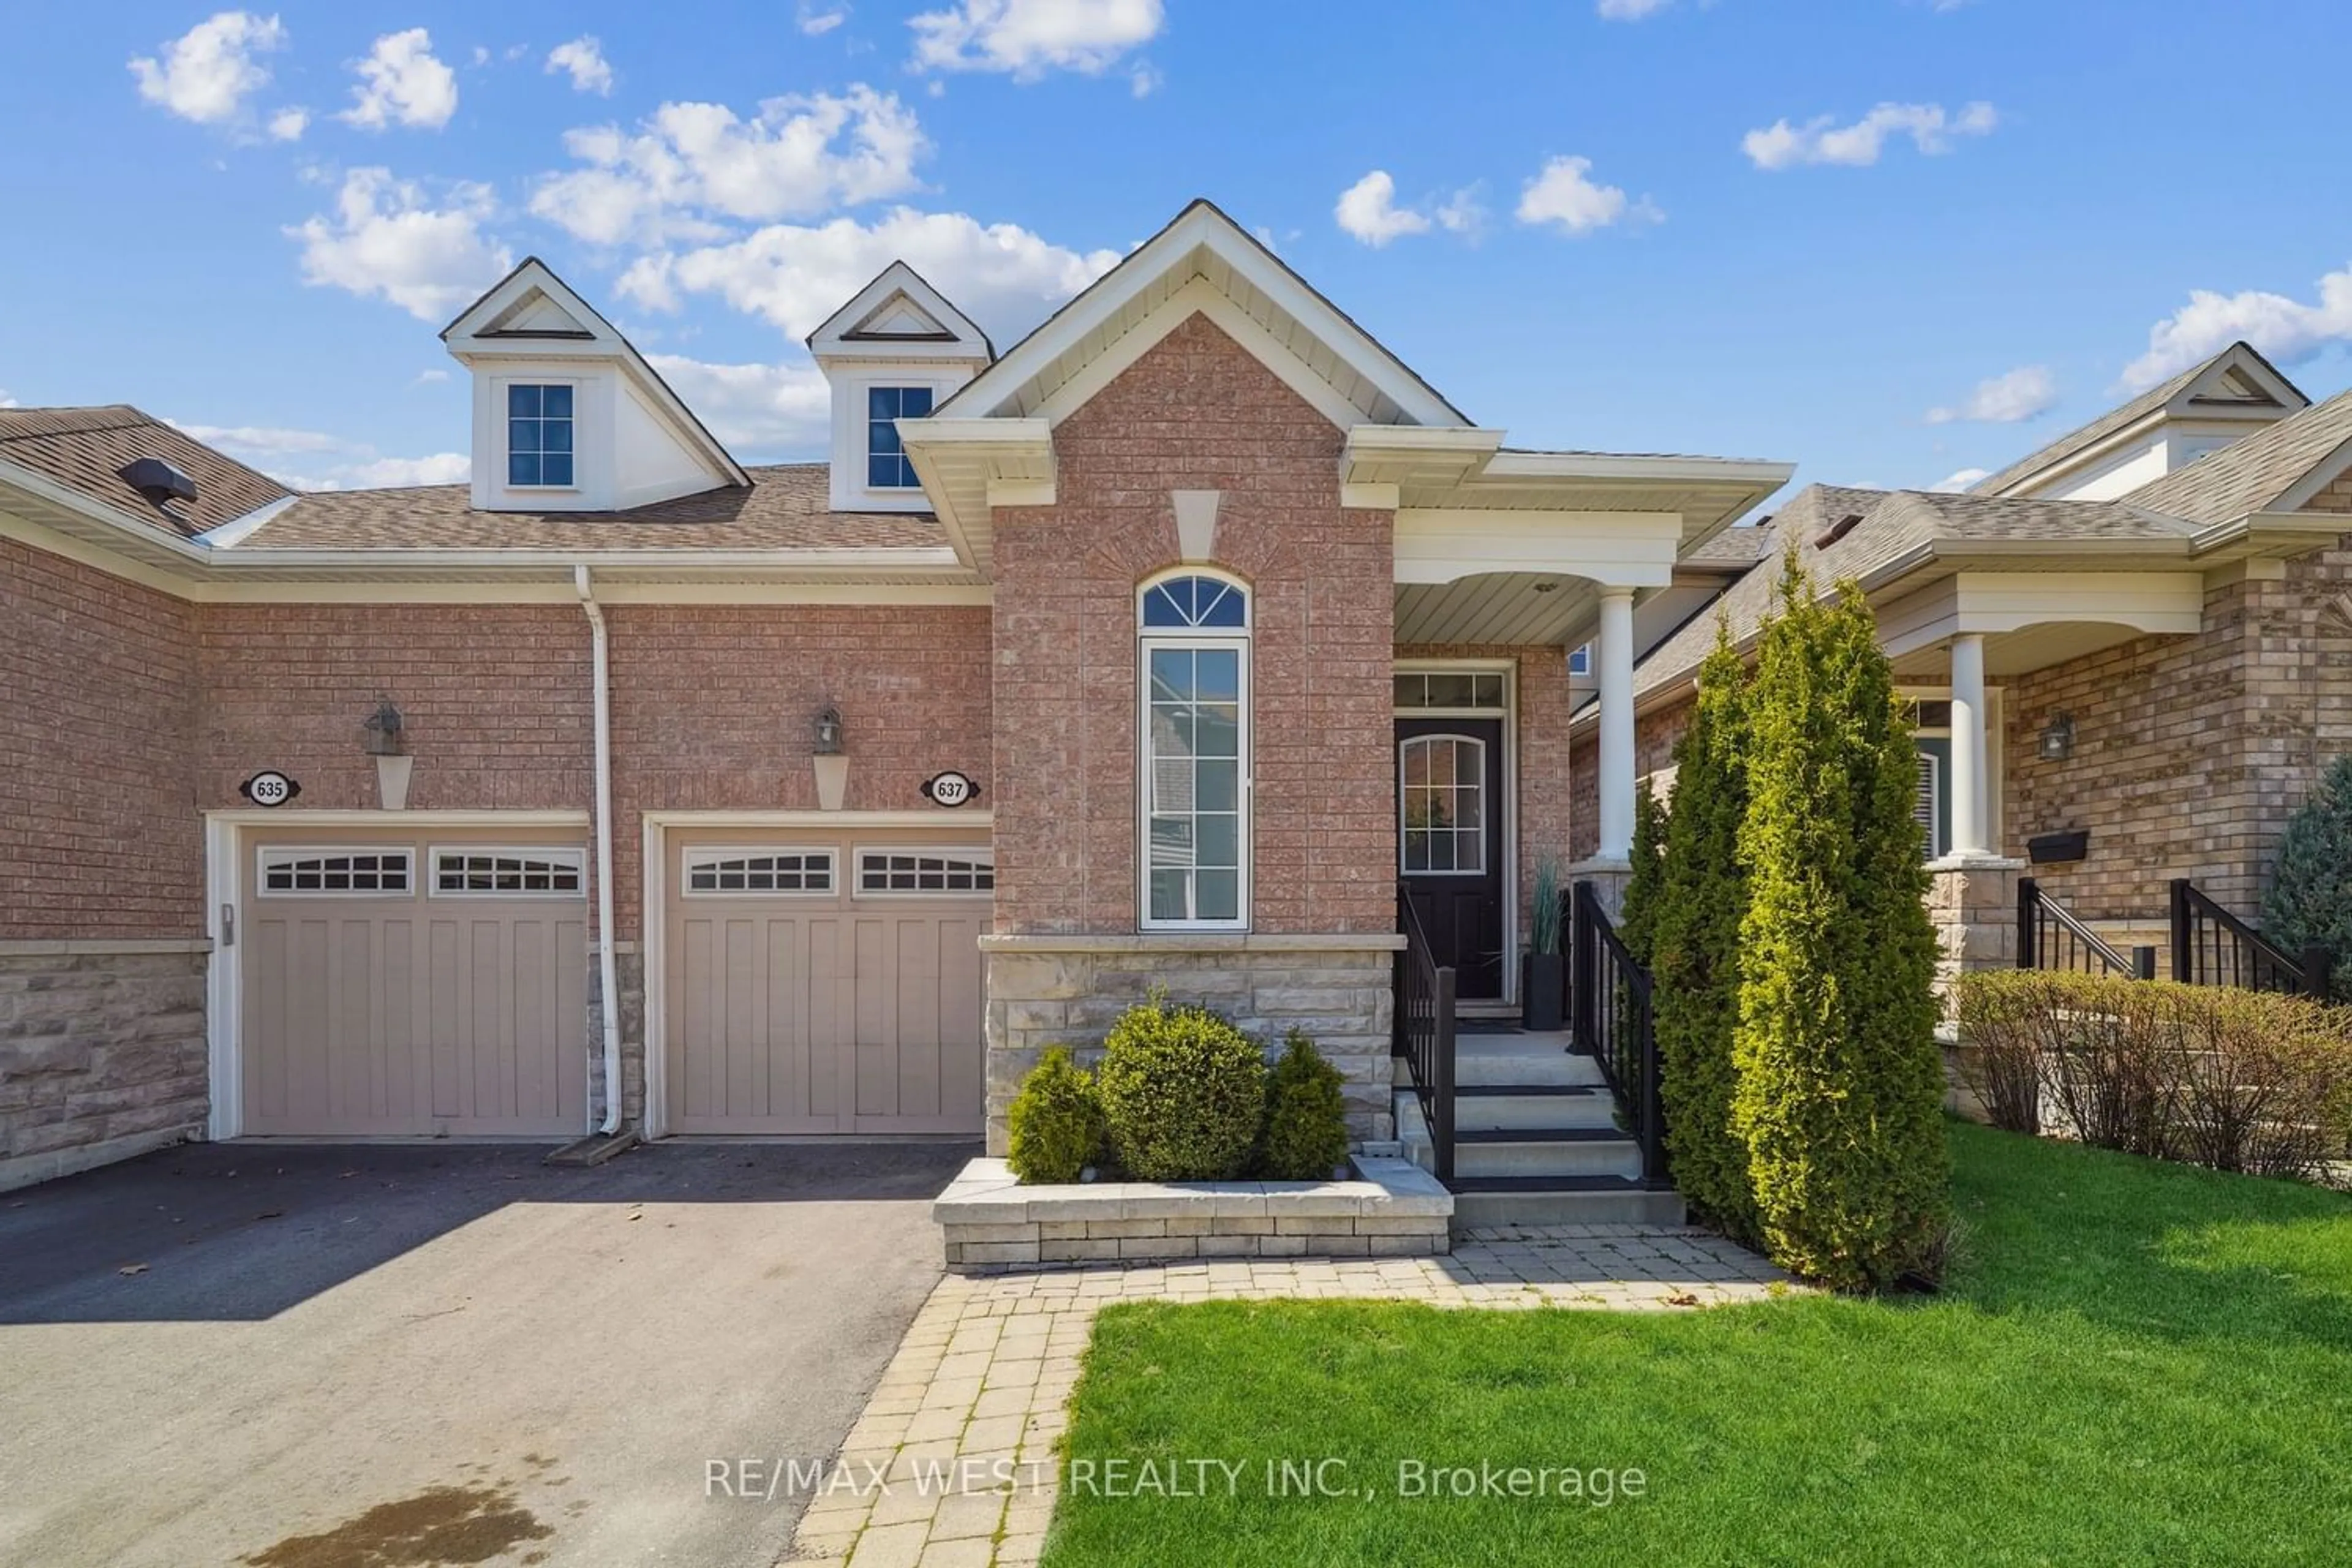 Home with brick exterior material for 637 Tapestry Lane, Newmarket Ontario L3X 3C8